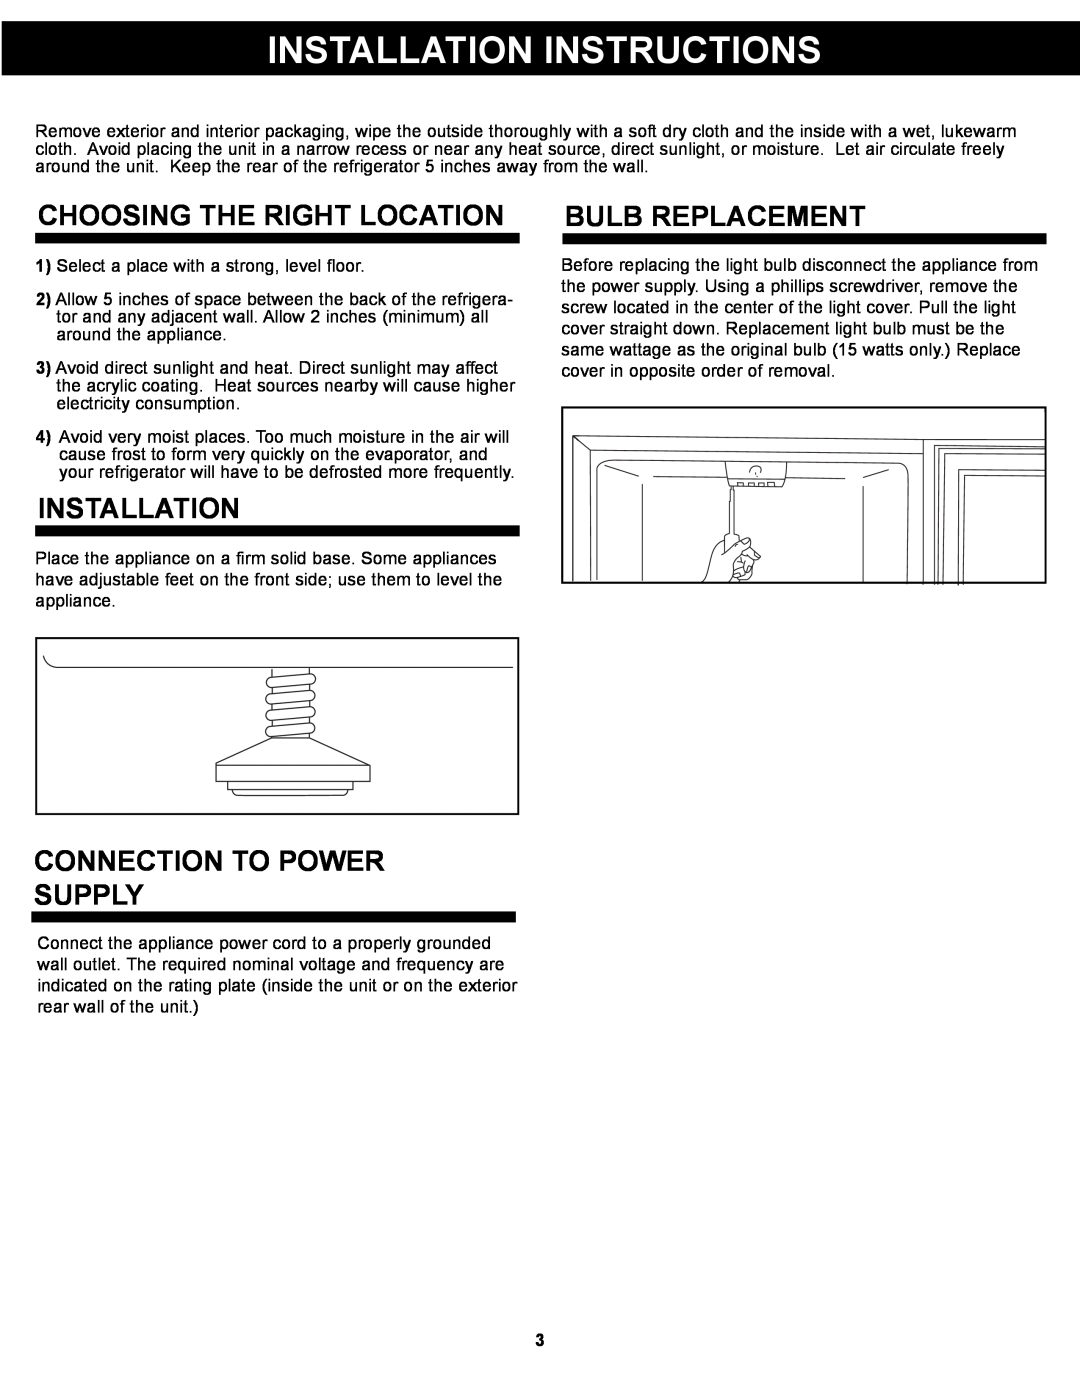 Danby DAR044A1BDD Installation Instructions, Choosing The Right Location, Bulb Replacement, Connection To Power Supply 